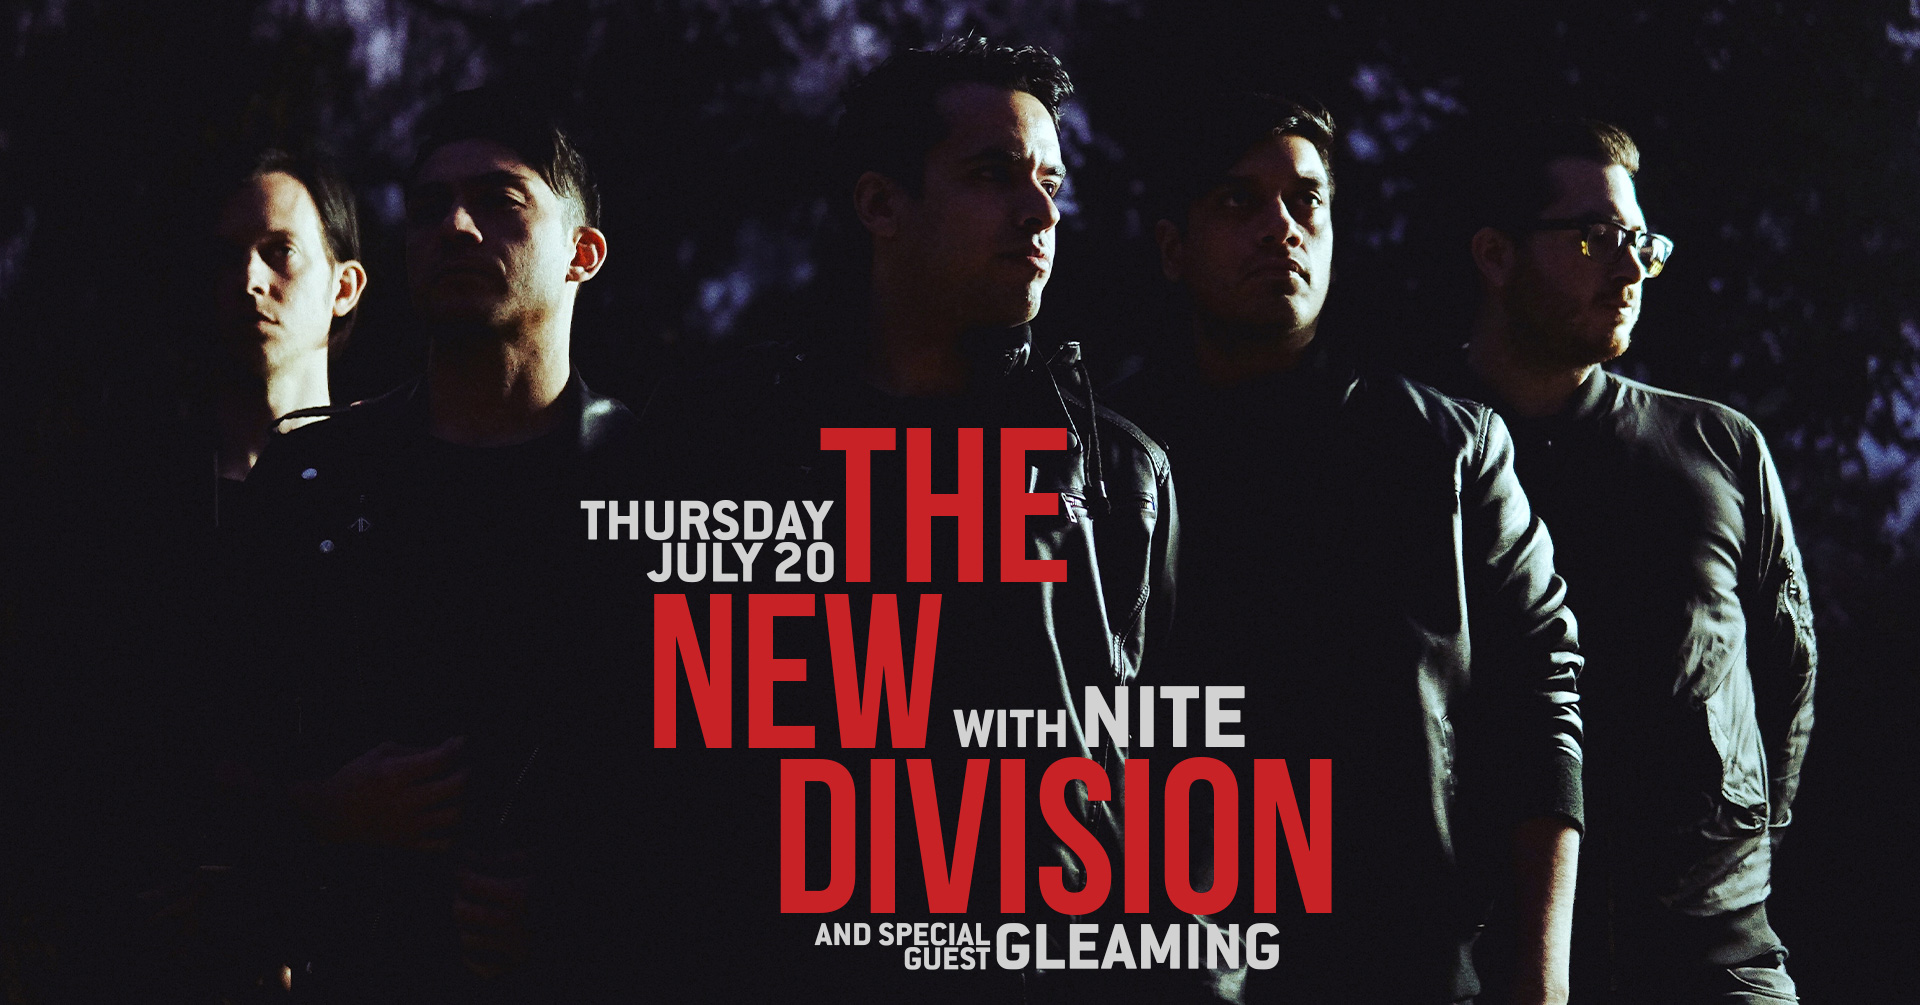 THE NEW DIVISION w/ Nite and Gleaming